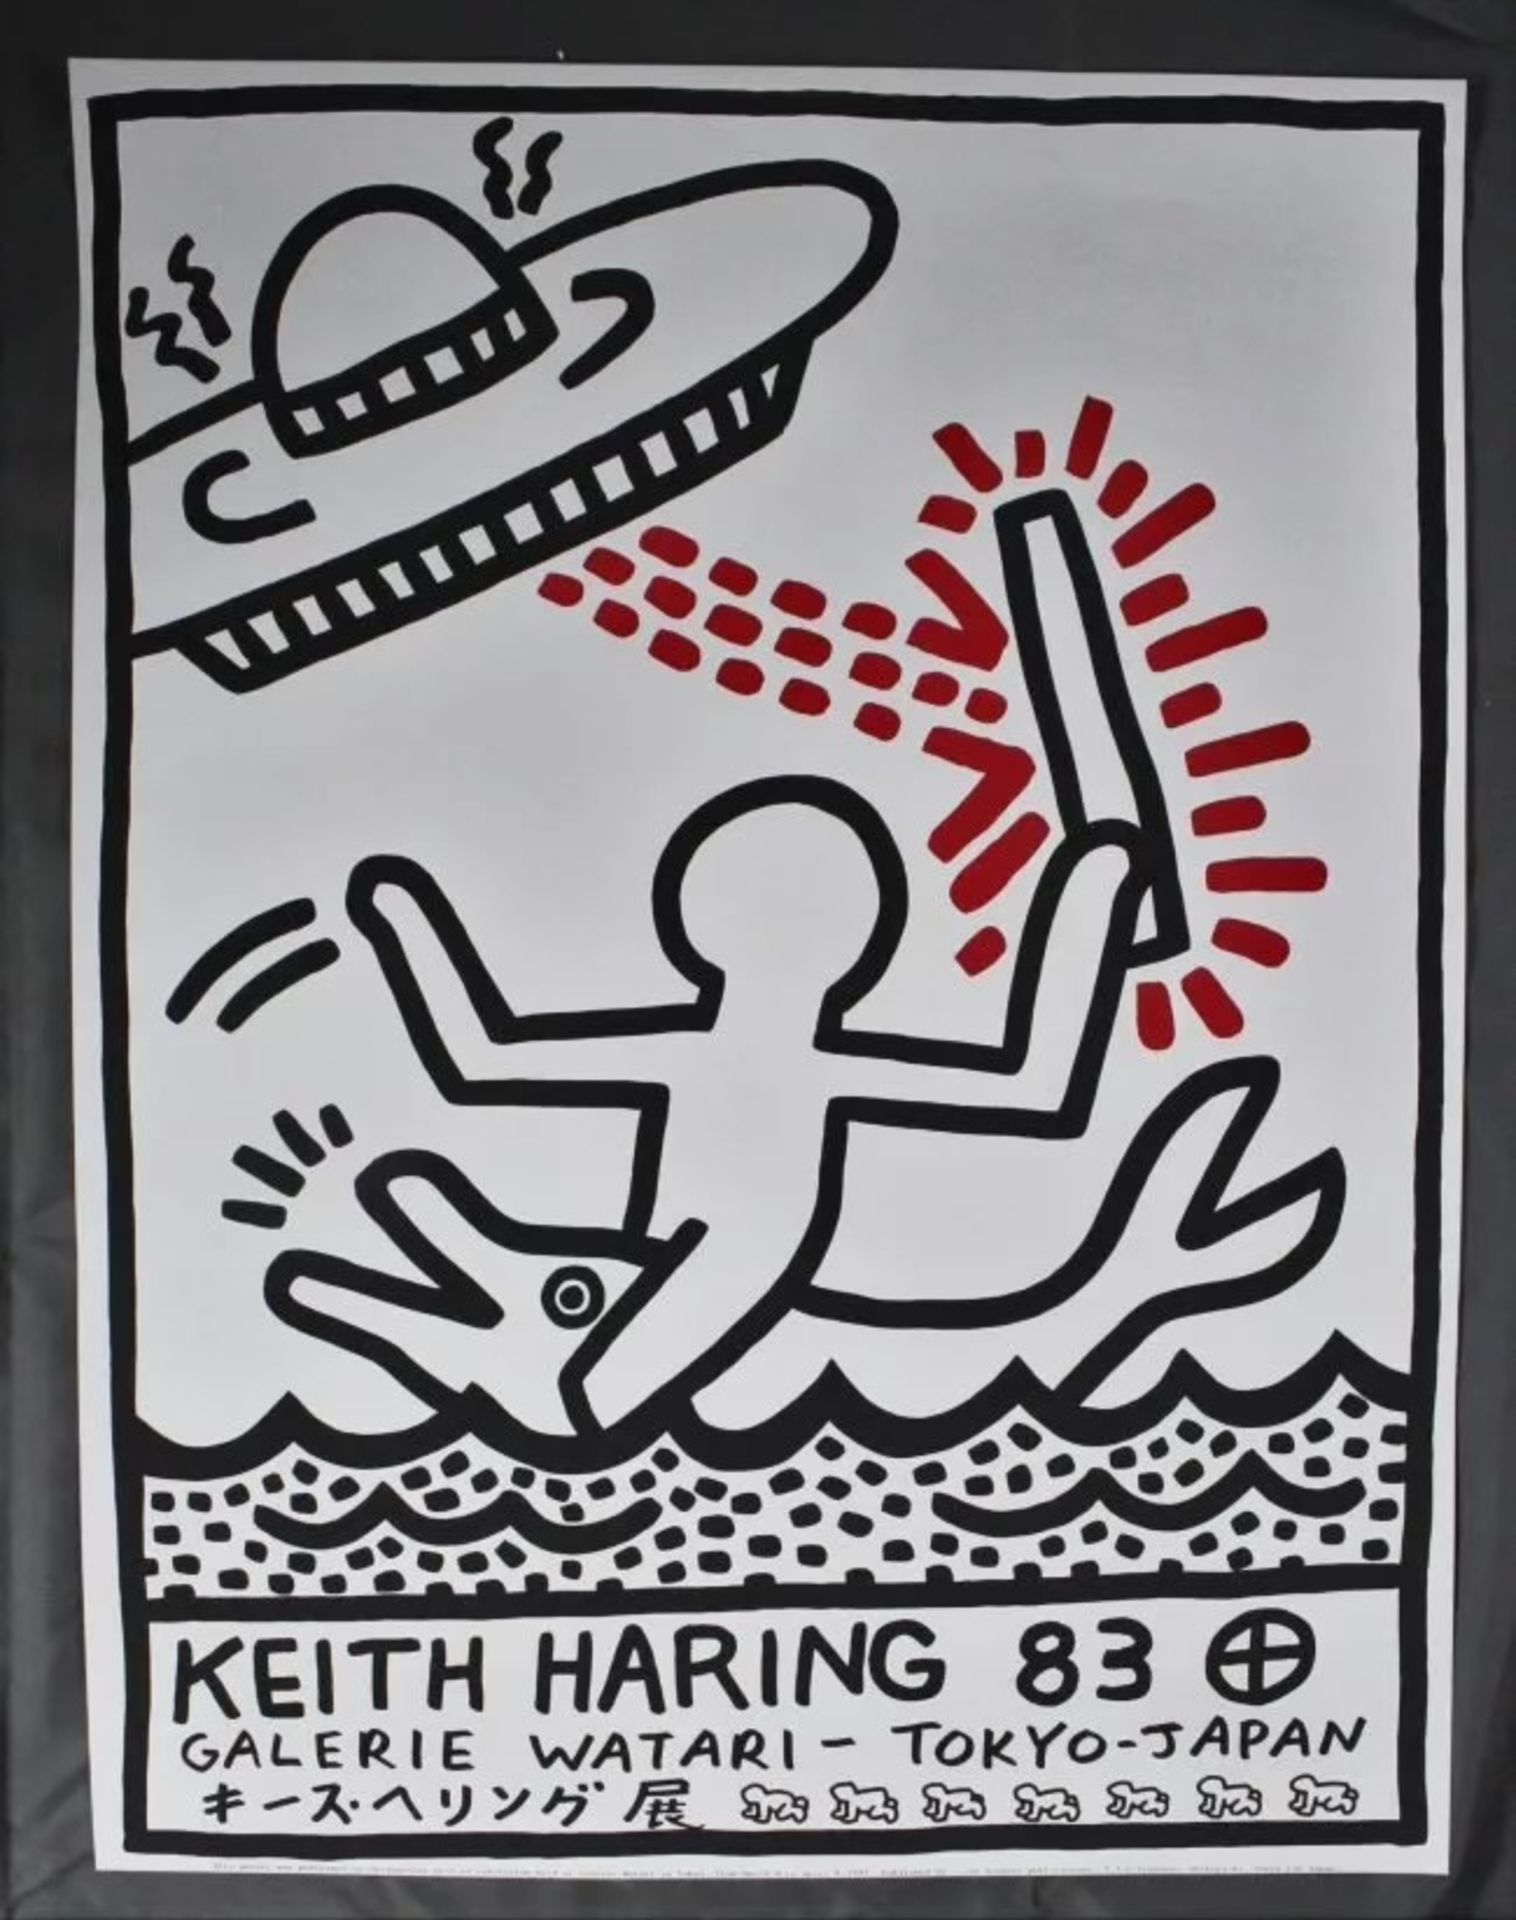 Keith Haring, Exhibition Poster for Galerie Watari